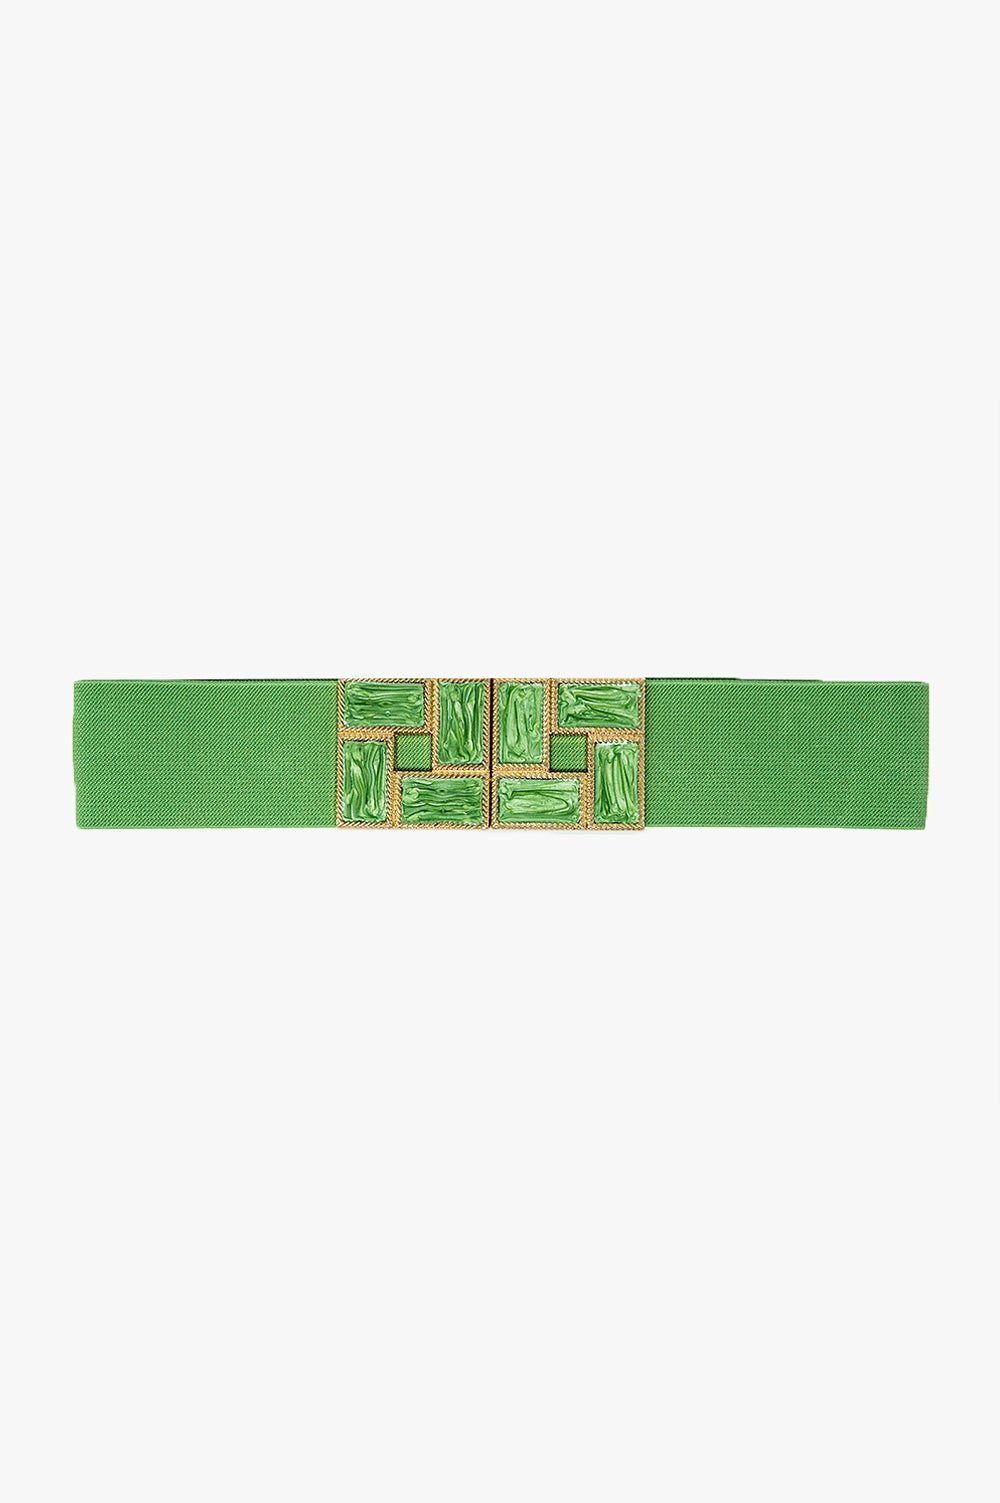 Q2 Green Elastic Belt With Squared Marbled Buckles And Gold Details